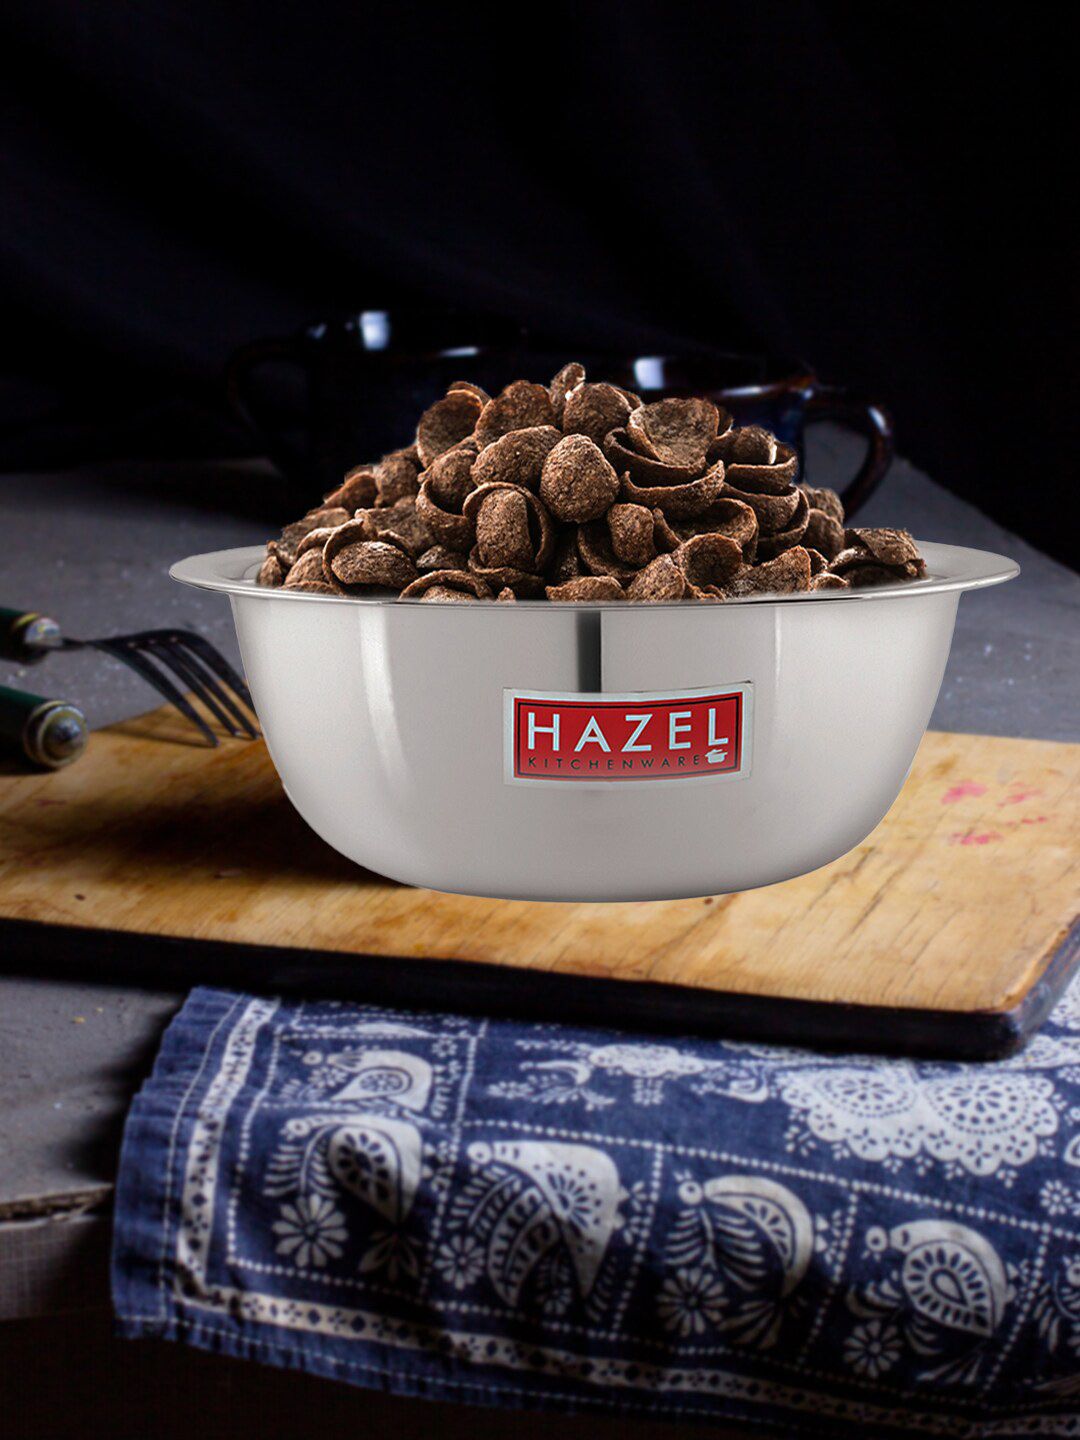 HAZEL Silver-Toned Stainless Steel Serving Bowl Price in India